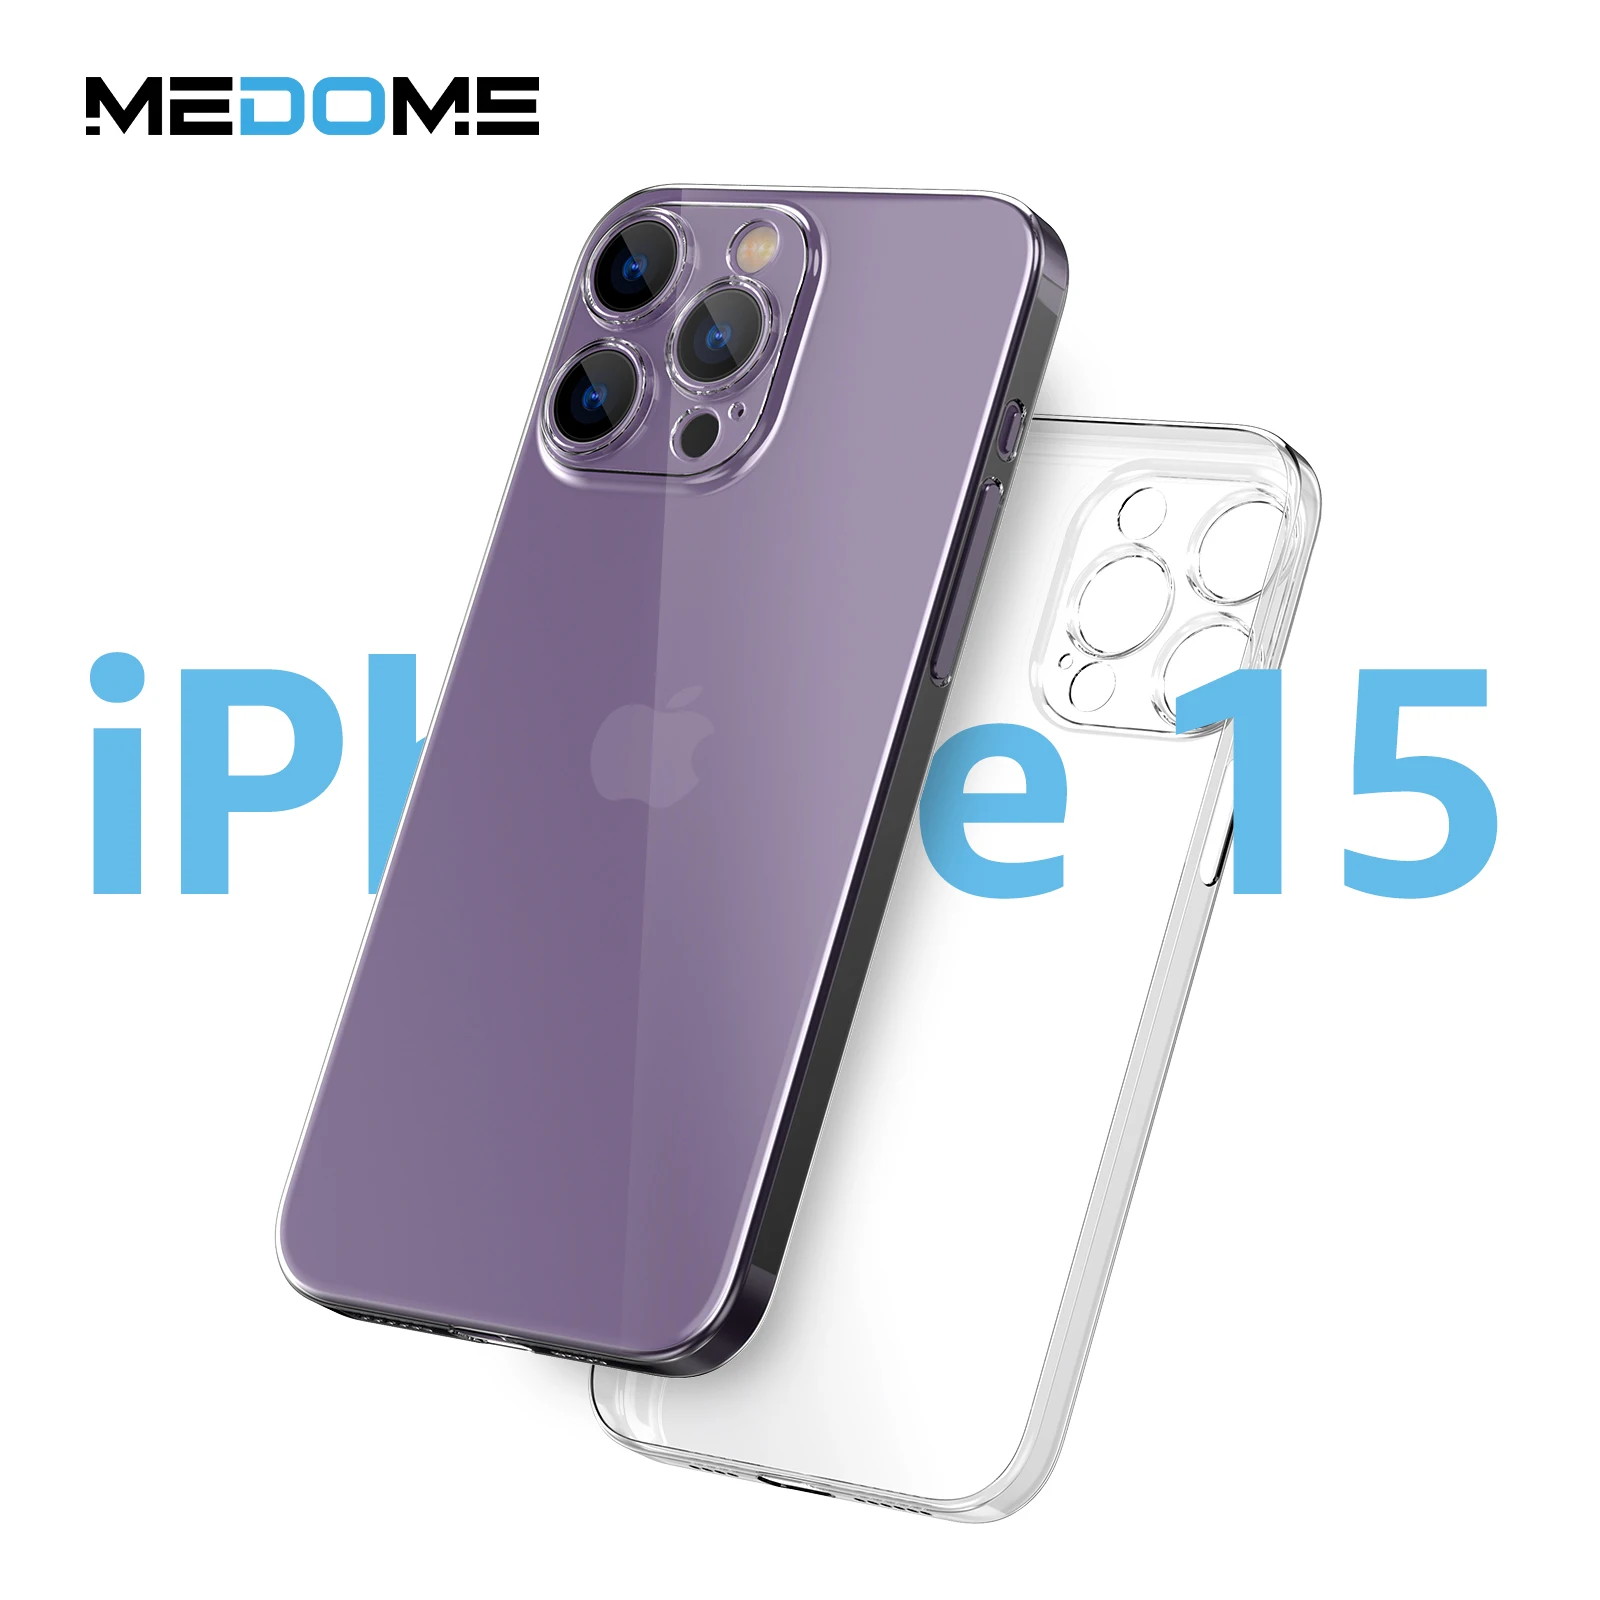 

Medome 0.45 Thin PP For iPhone 15 Case For iPhone 15 Pro Max Clear Case Mobile Phone Case 11 12 13 14 Dropshipping Products 2023